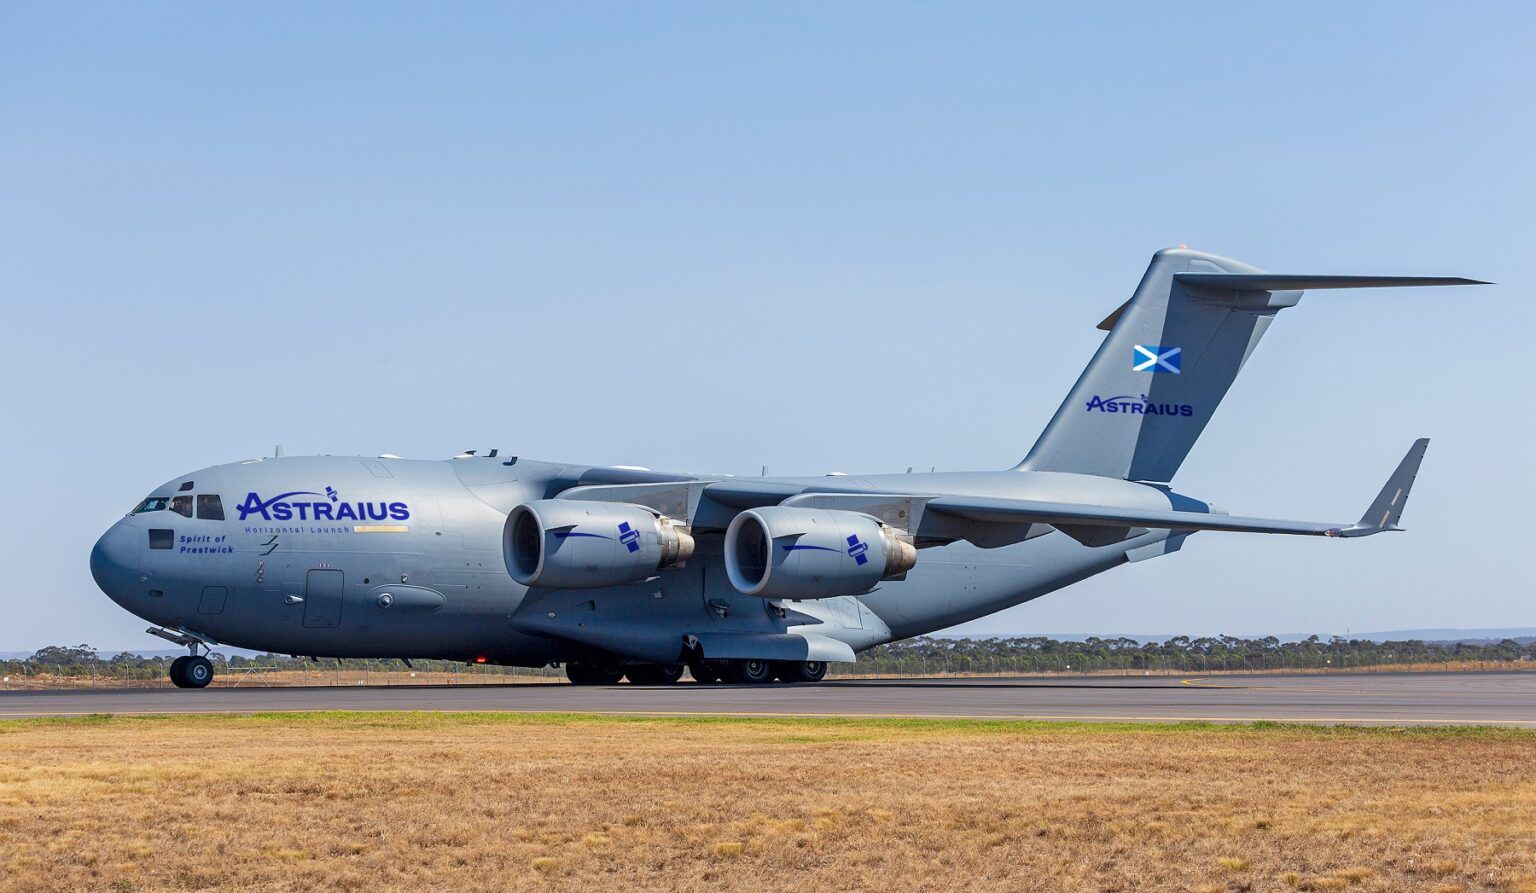 An Astraius C-17 parked at an airfield.